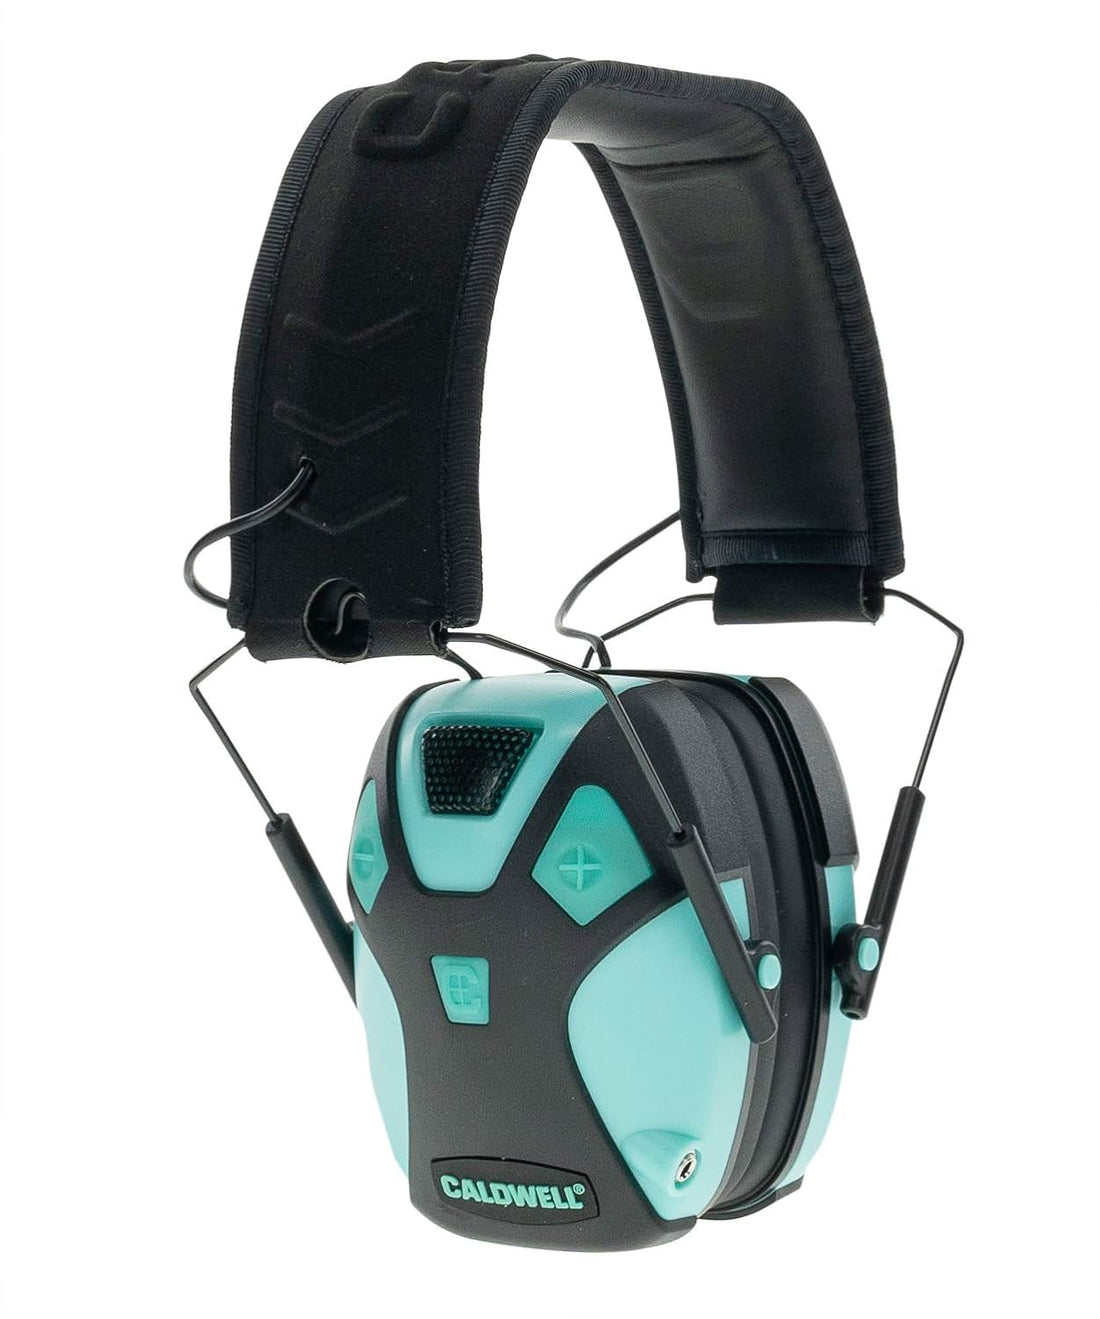 Caldwell E-Max Low Profile Electronic Hearing Protection with Sound Amplification 21-25 NRR - Adjustable Earmuffs